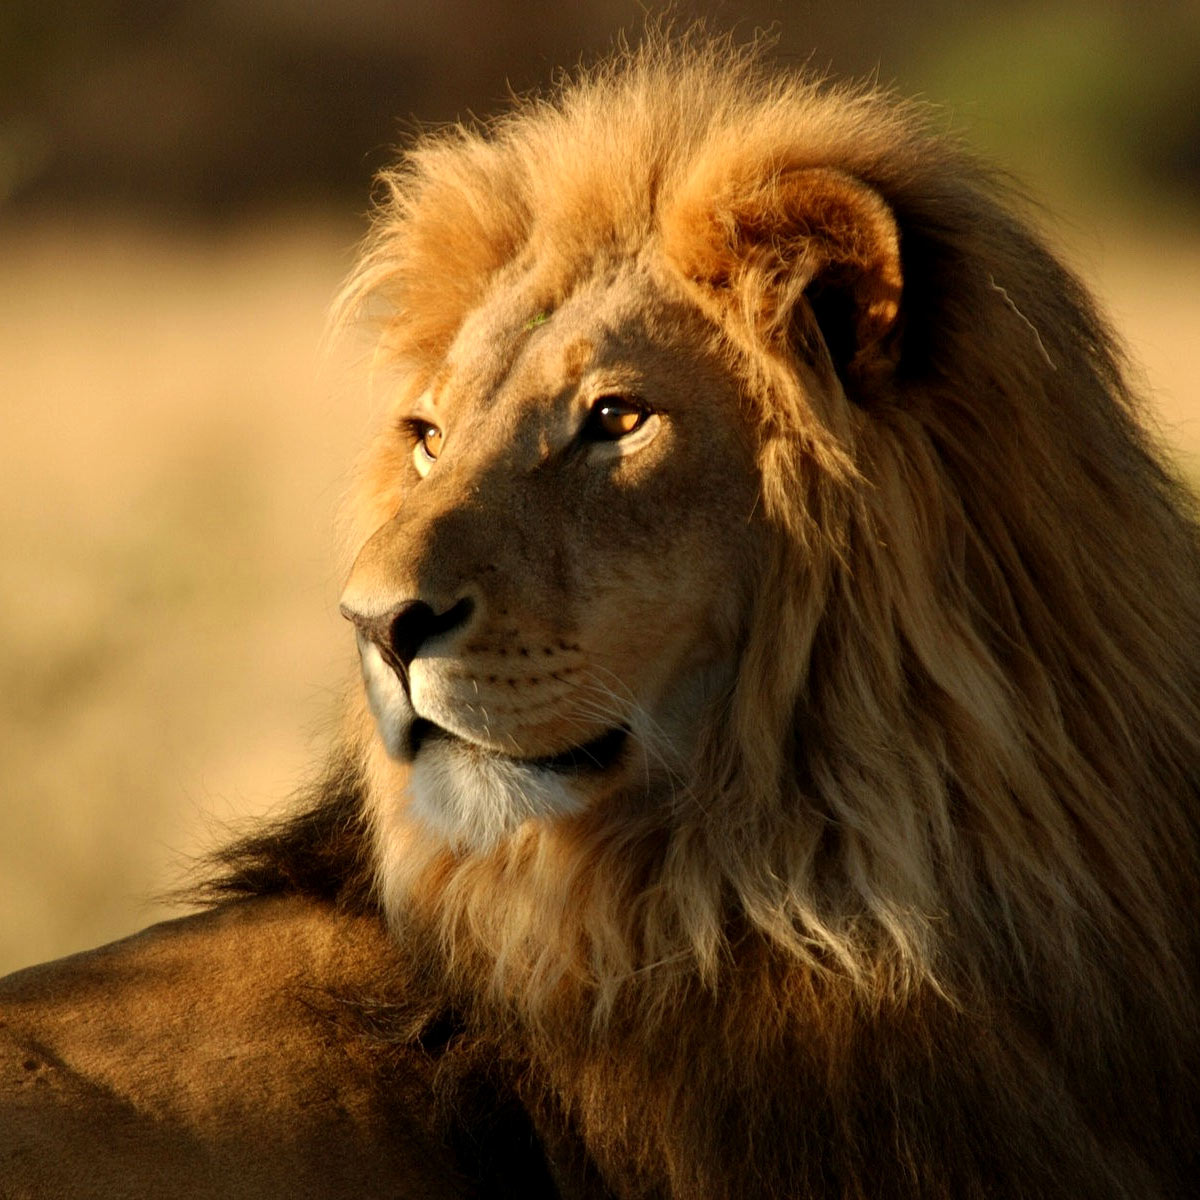 A healthy-looking African lion beautifully lit with the golden morning sun